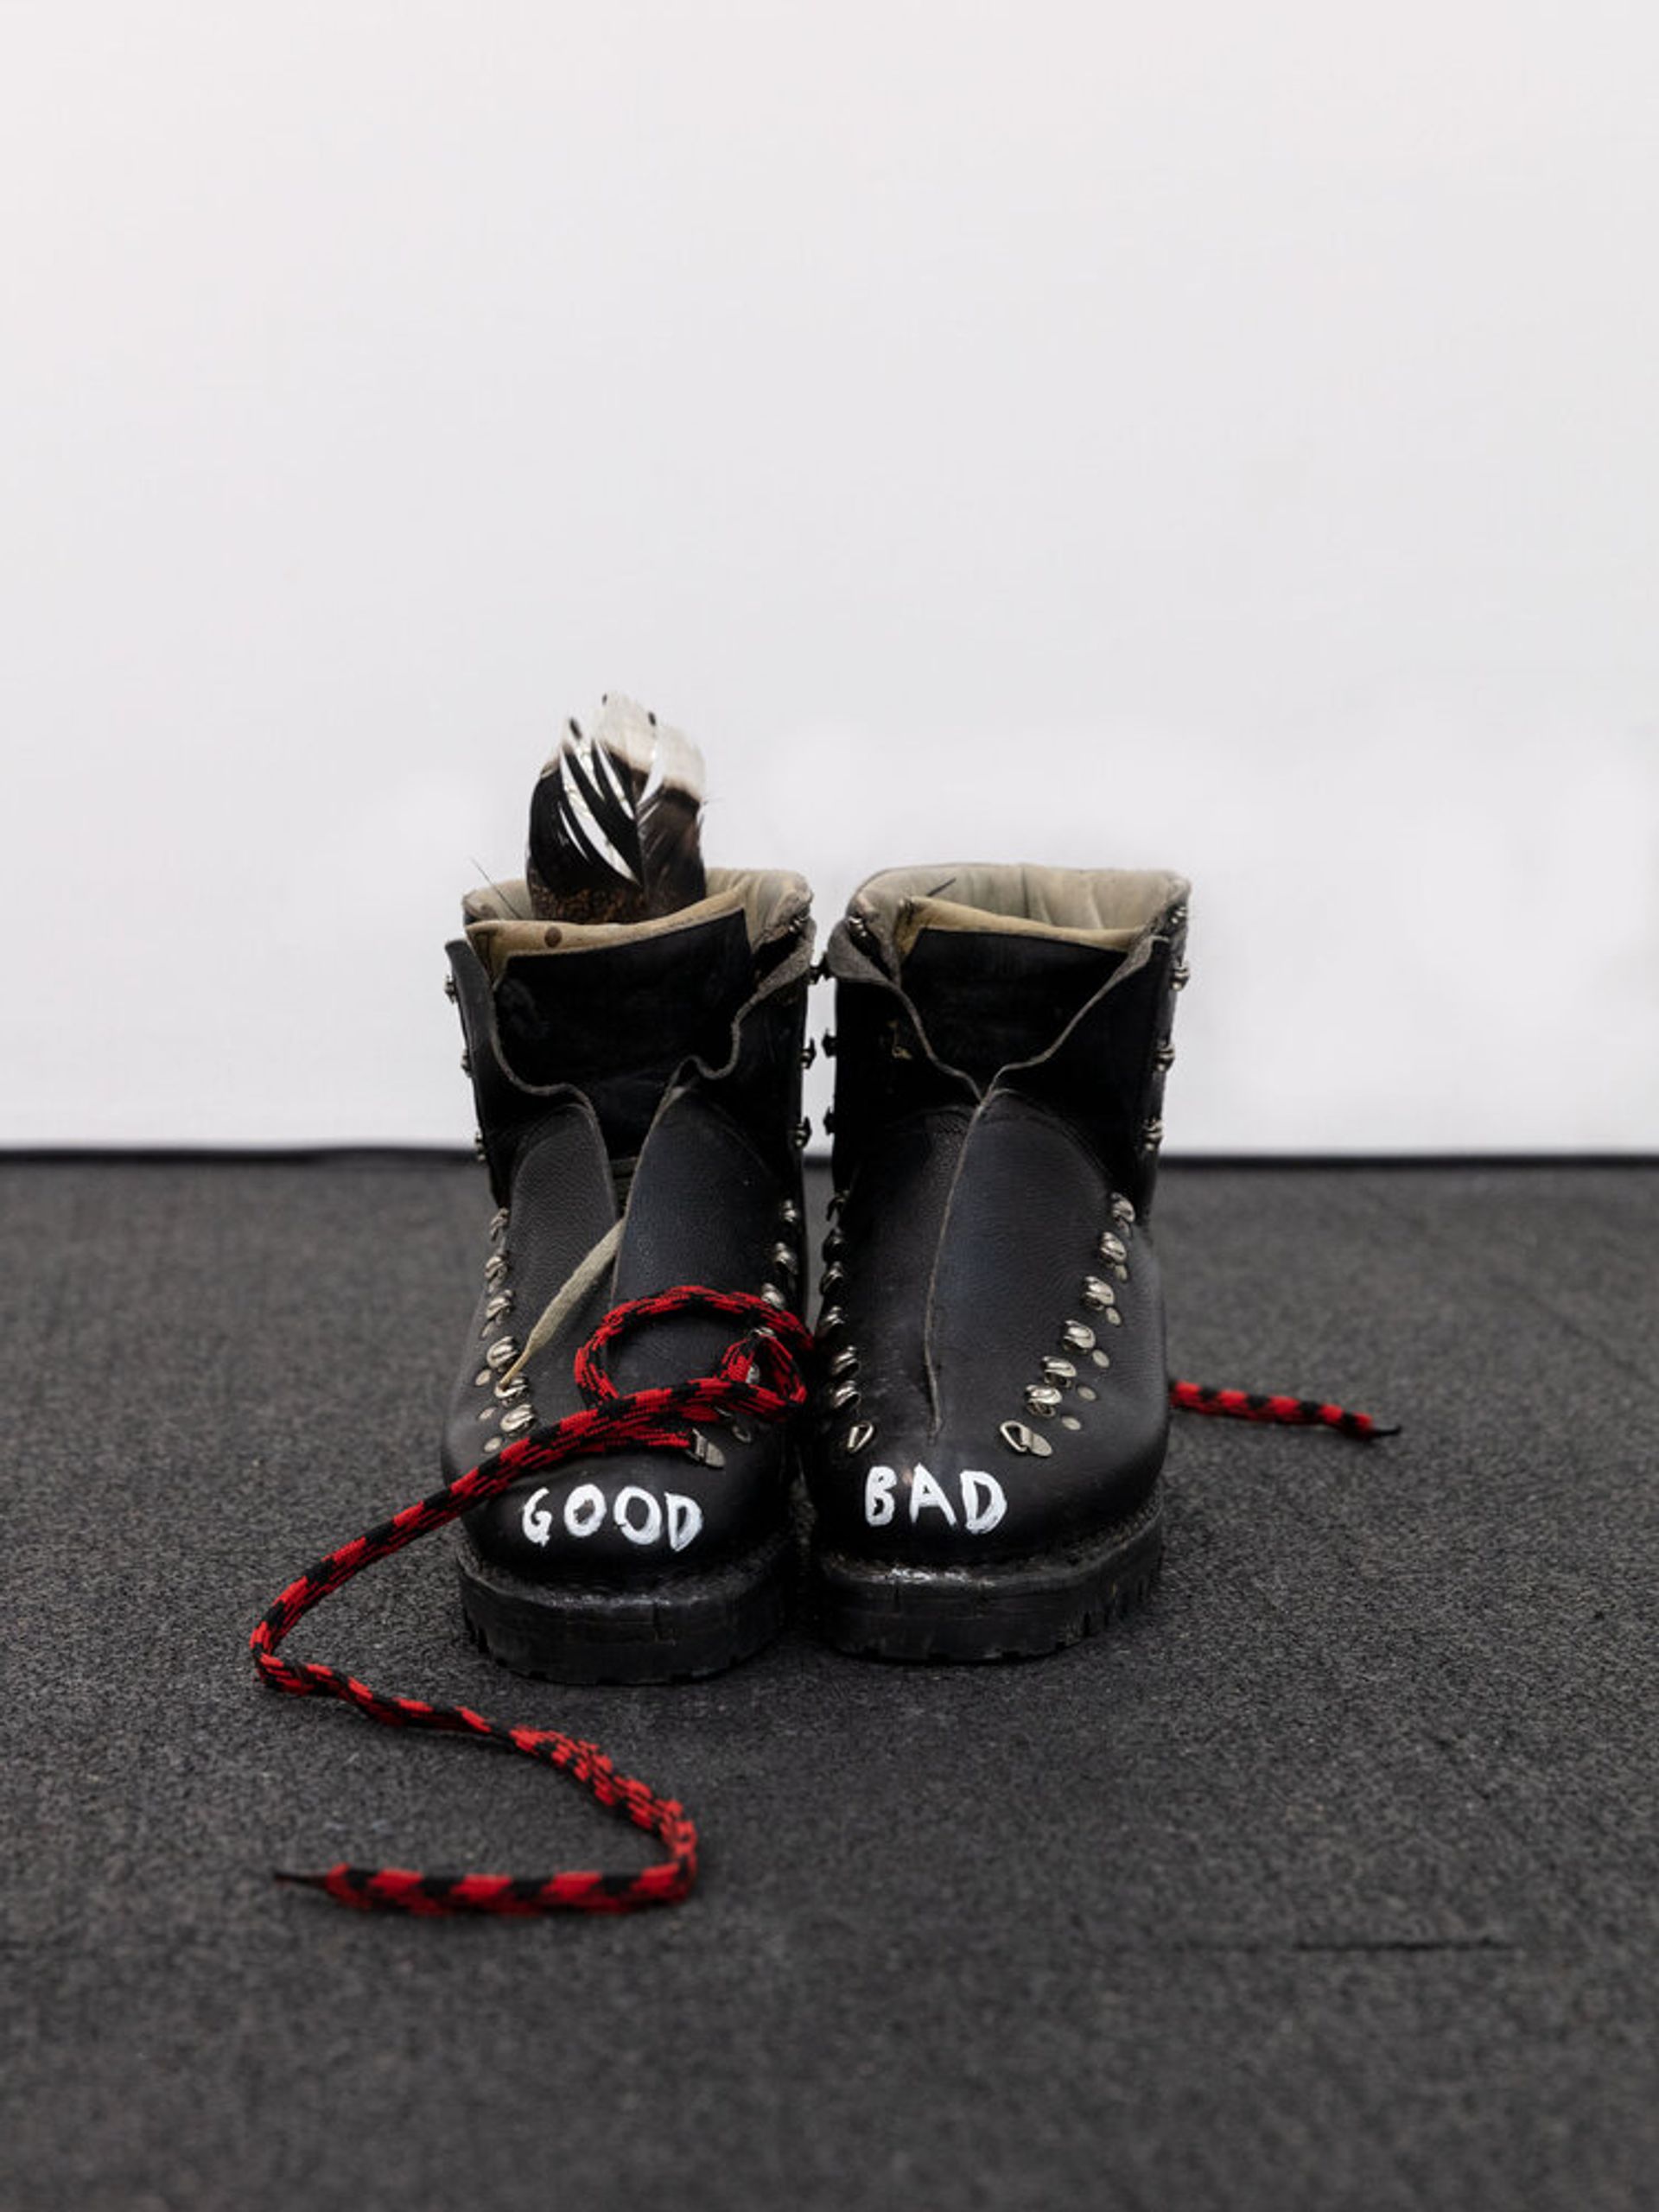 Anna McCarthy, Good Bad Boots, 2020, acrylic on Leather Boots, 20 × 23 × 30 cm